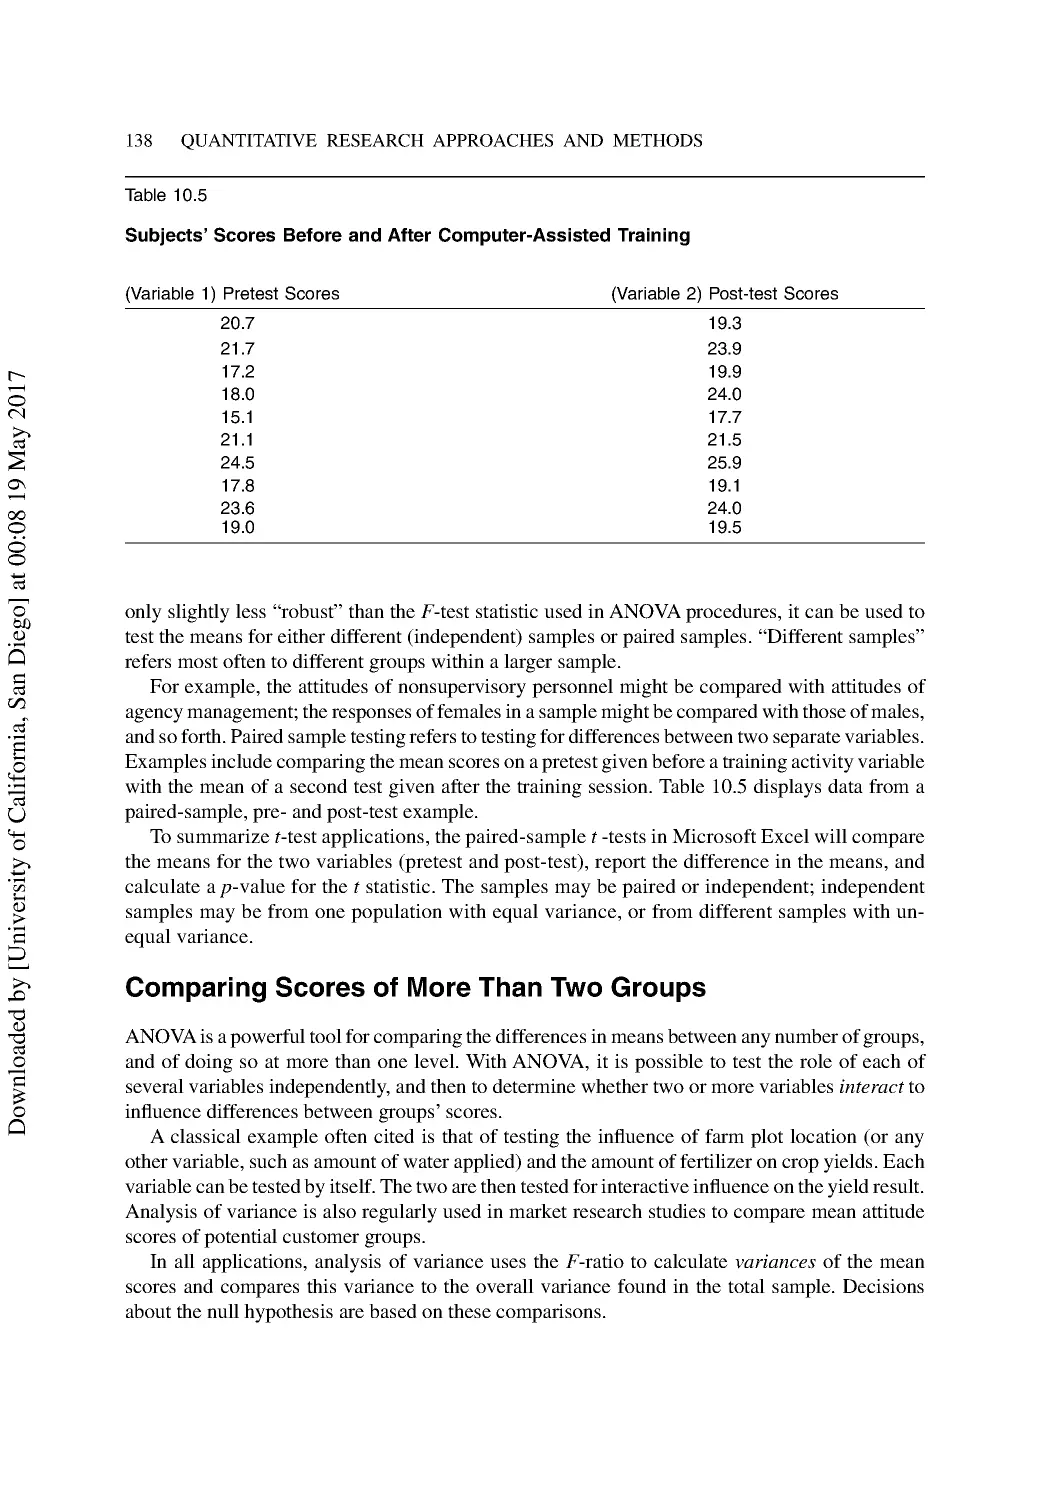 Comparing Scores of More Than Two Groups